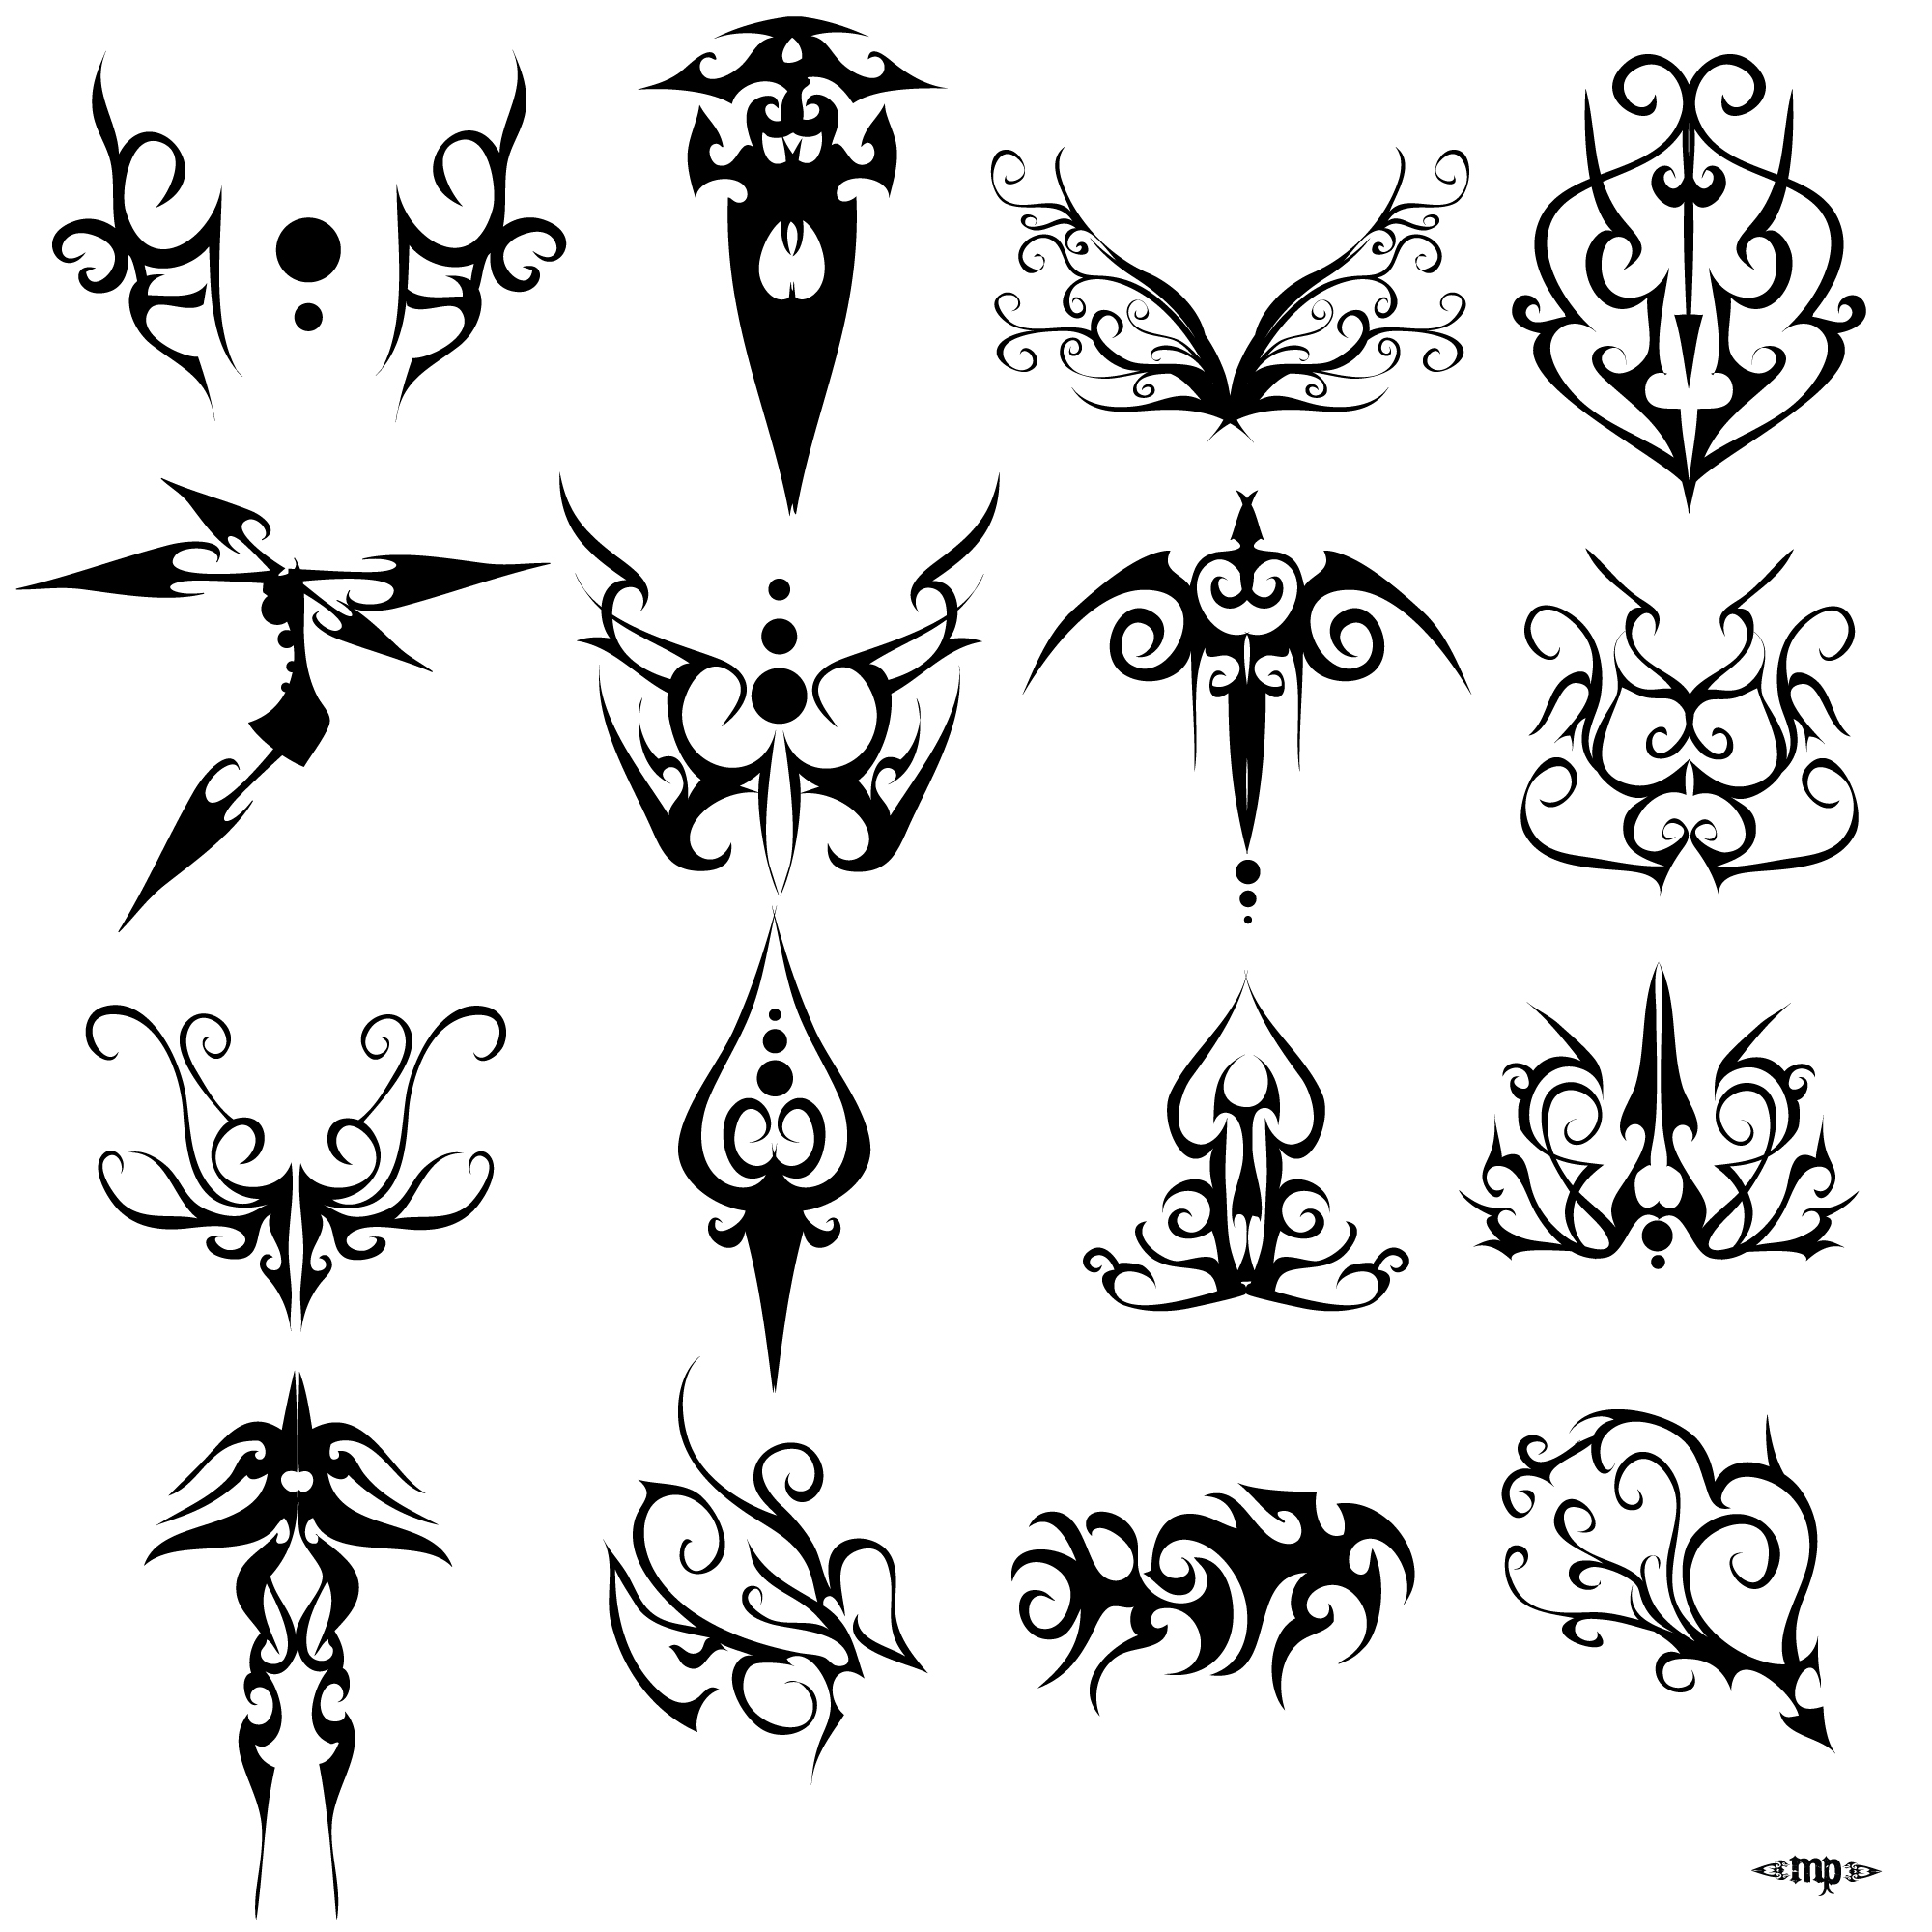 Free Tattoos Drawings, Download Free Tattoos Drawings png images, Free